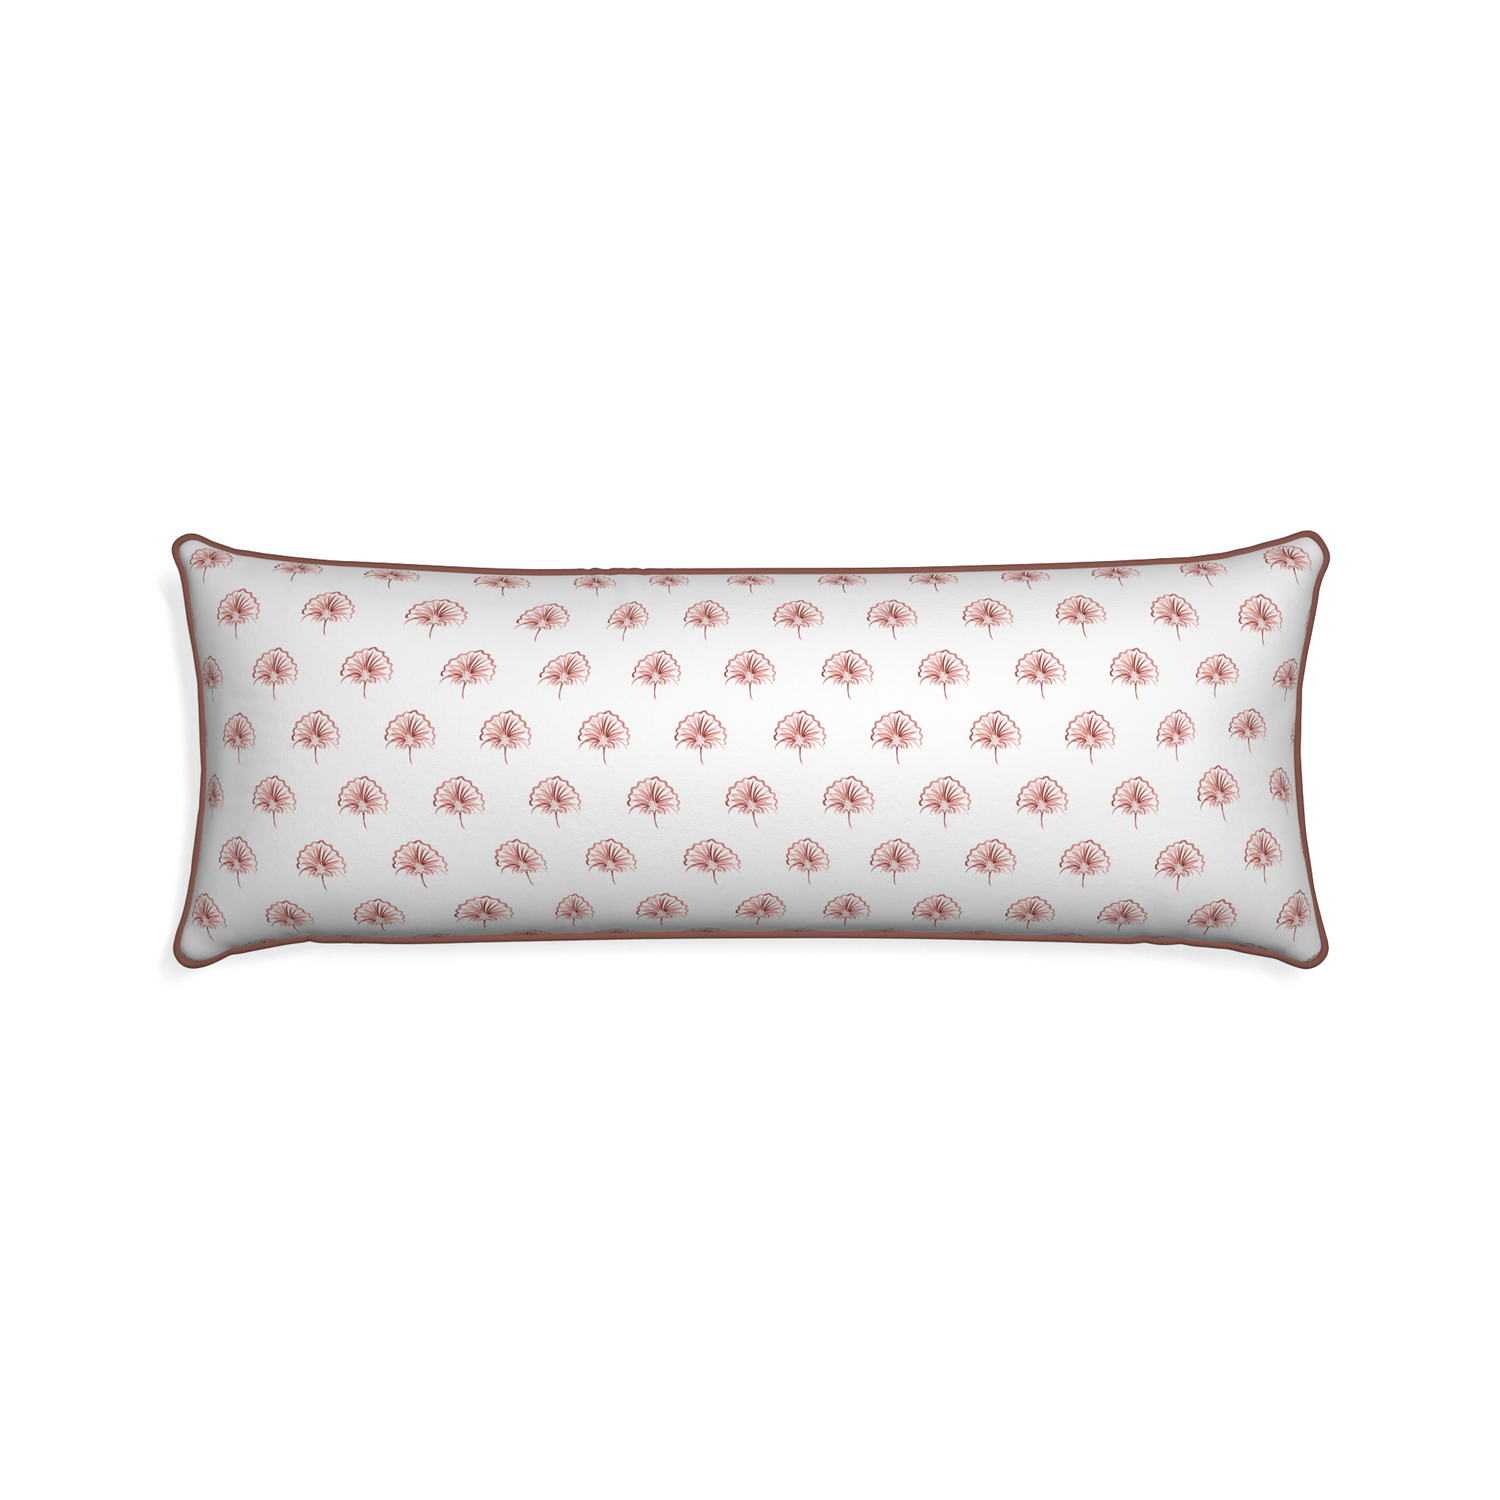 Xl-lumbar penelope rose custom floral pinkpillow with w piping on white background